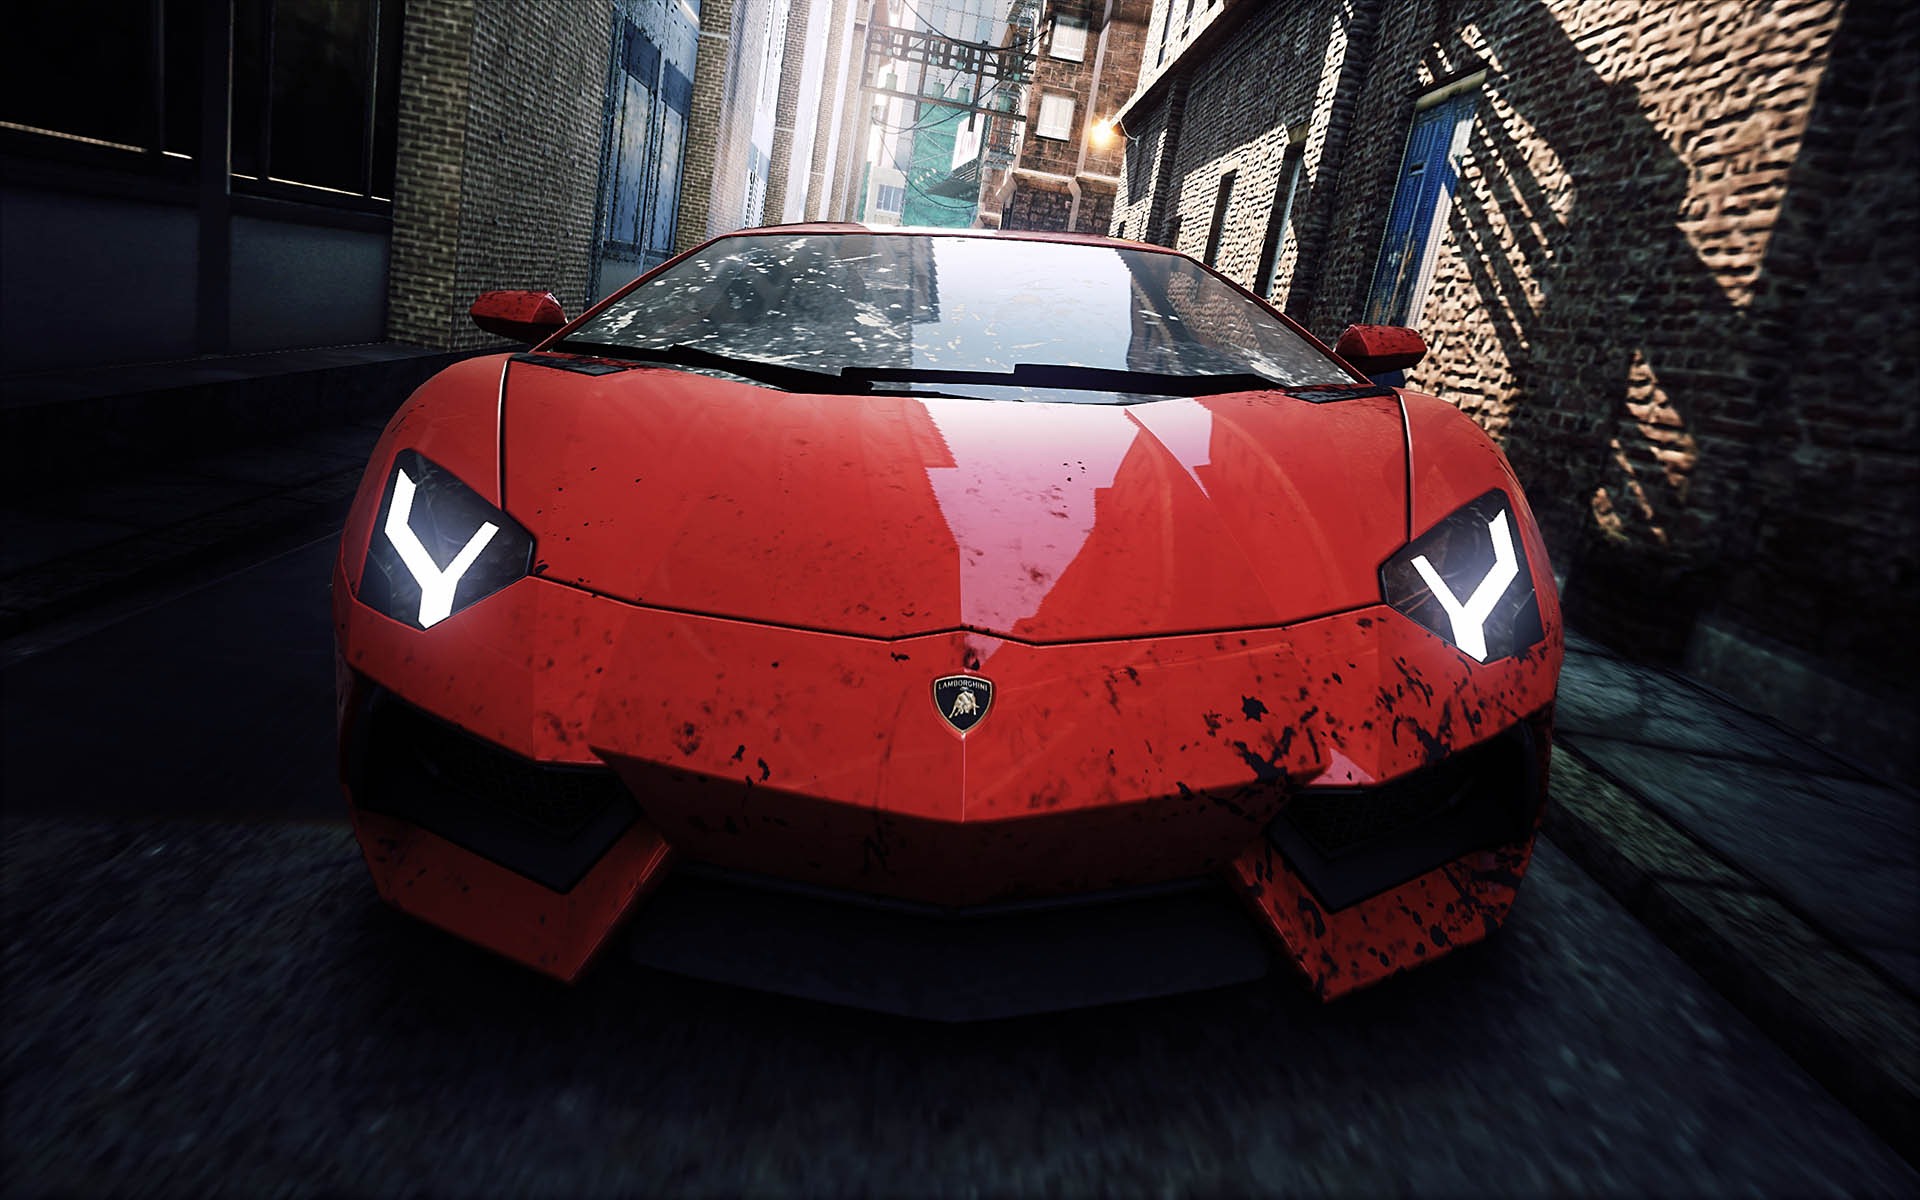 Need for Speed: Most Wanted 极品飞车17：最高通缉 高清壁纸10 - 1920x1200